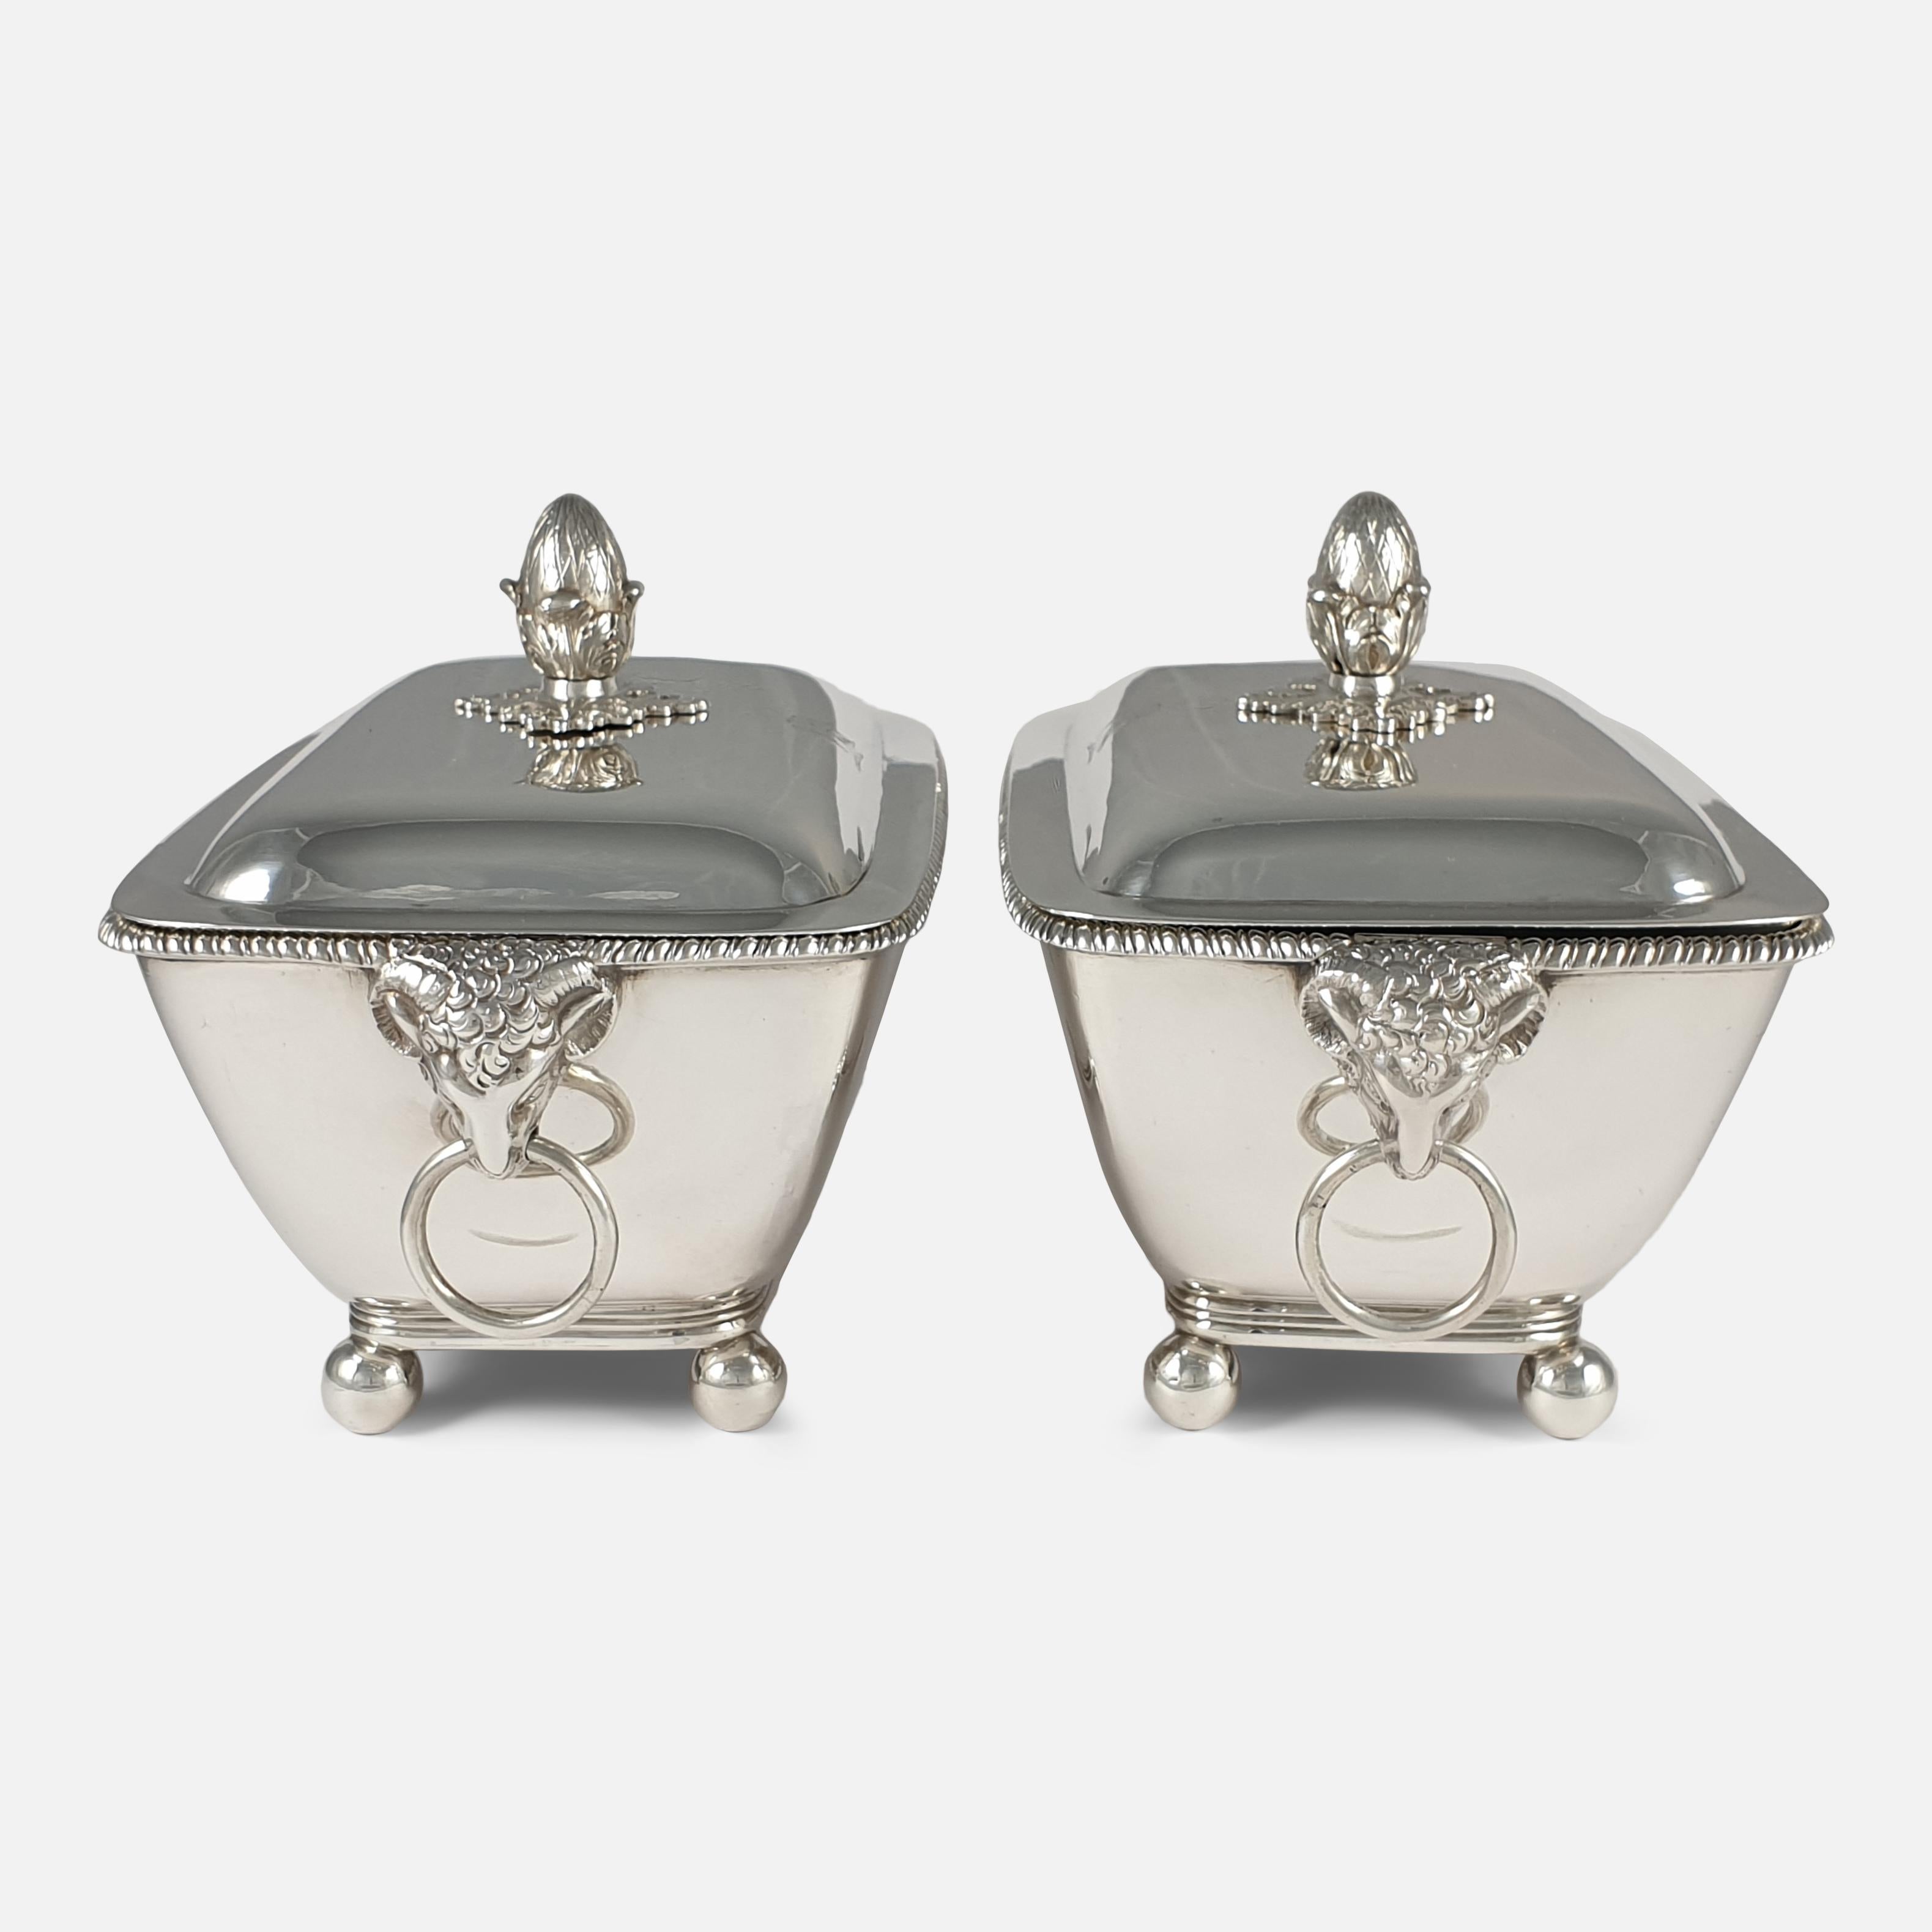 British Pair of George III Silver Sauce Tureens and Covers, John Robins, London, 1802 For Sale